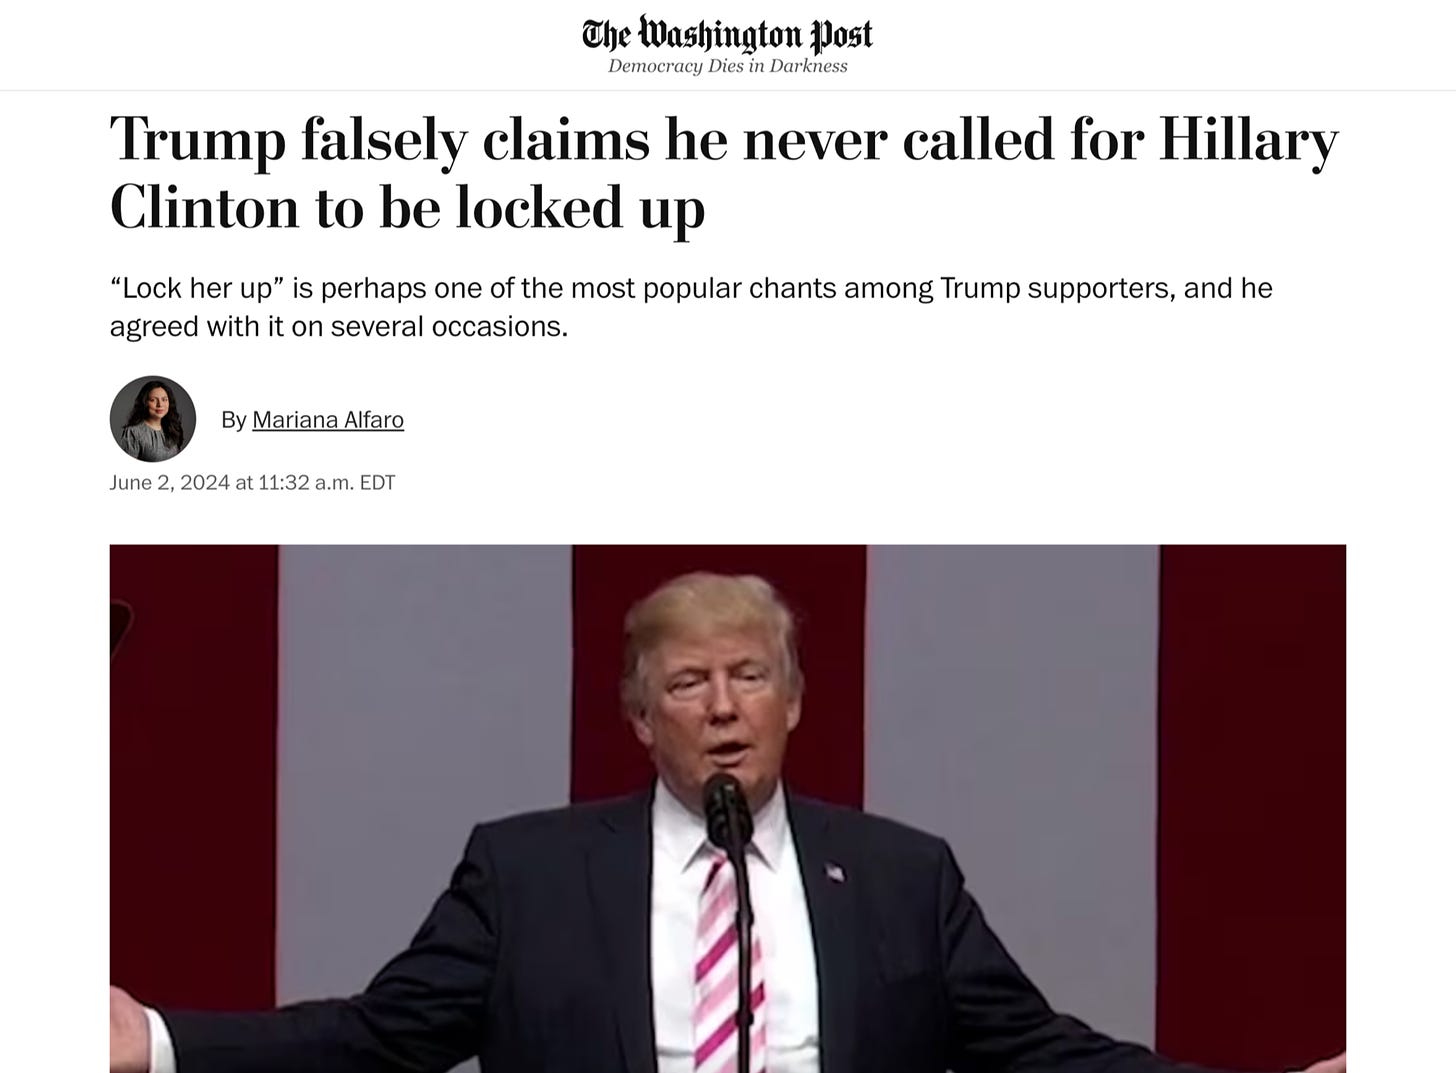 Trump falsely claims he never called for Hillary Clinton to be locked up